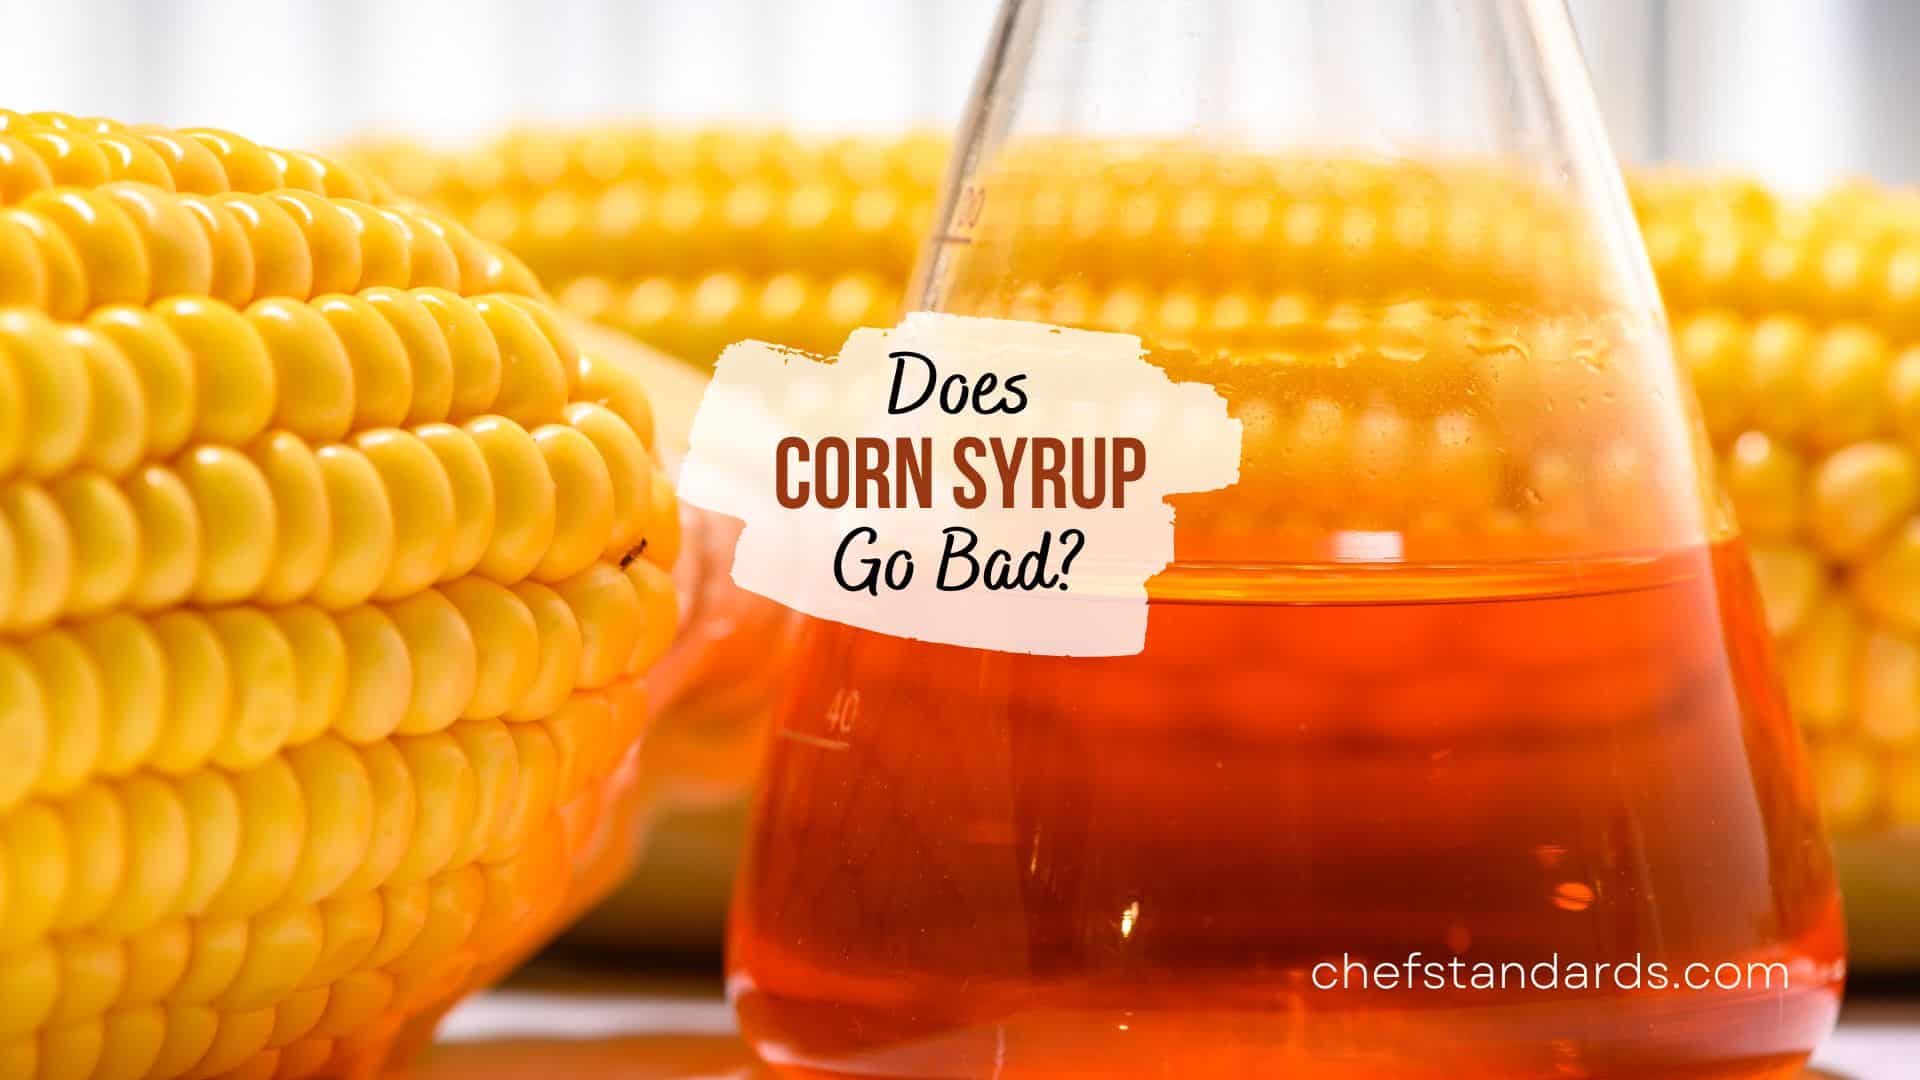 if the corn syrup goes bad